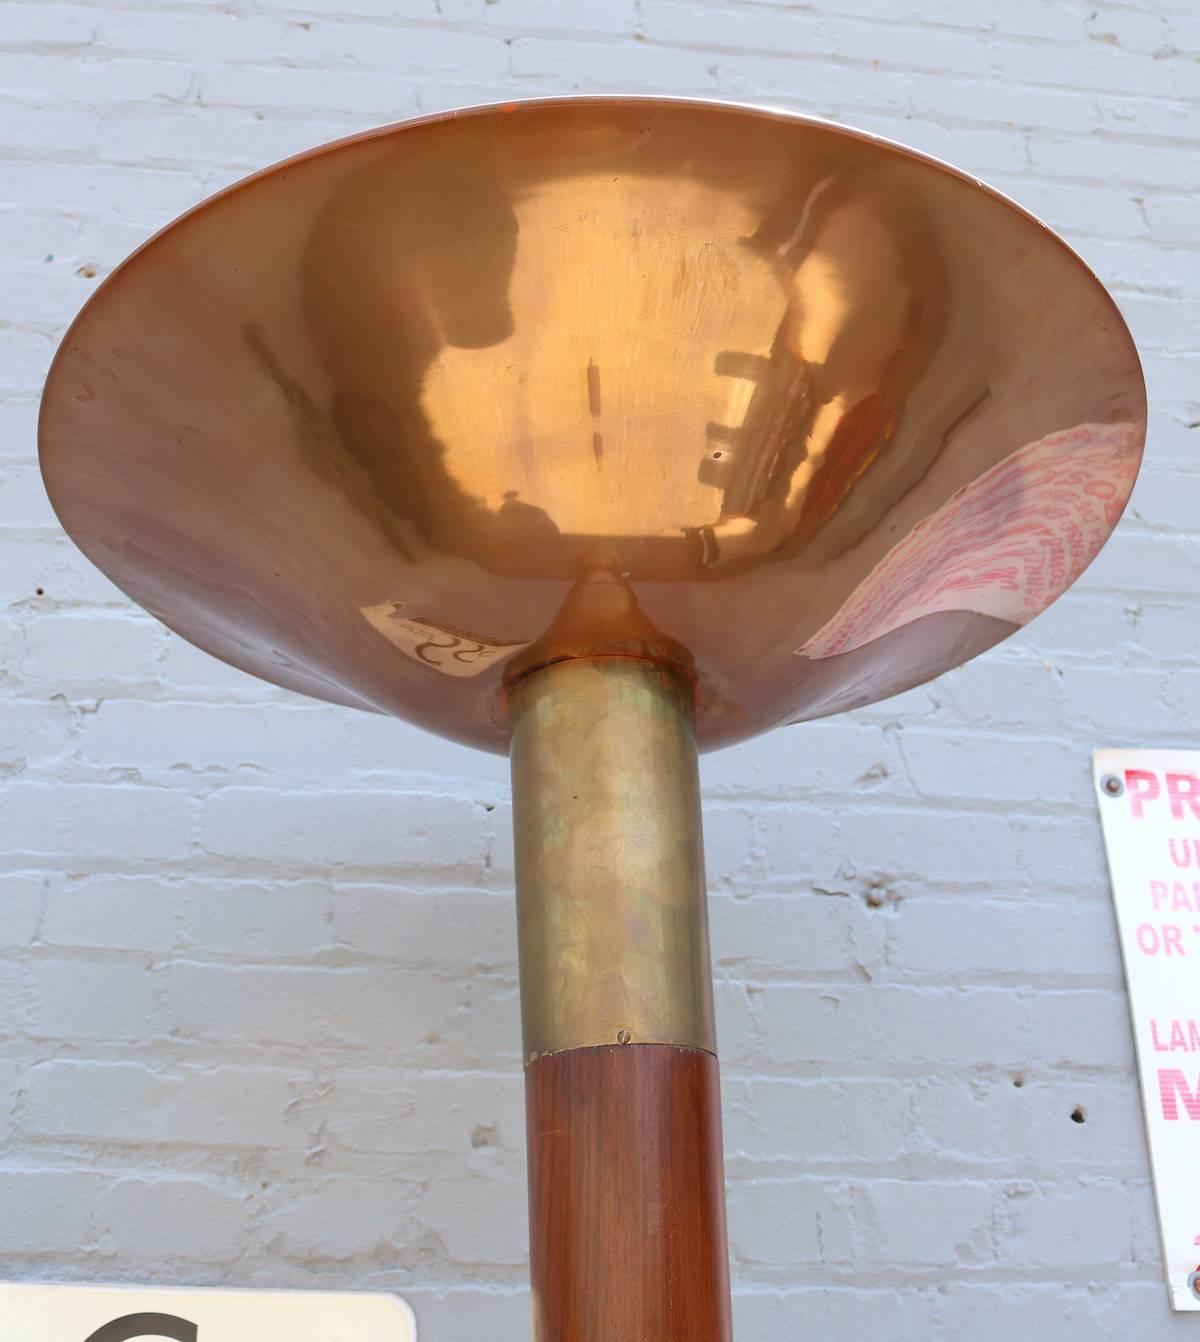 Tall 1960s floor lamp in wood, brass and copper with three-light.

Measure: Base diameter 17